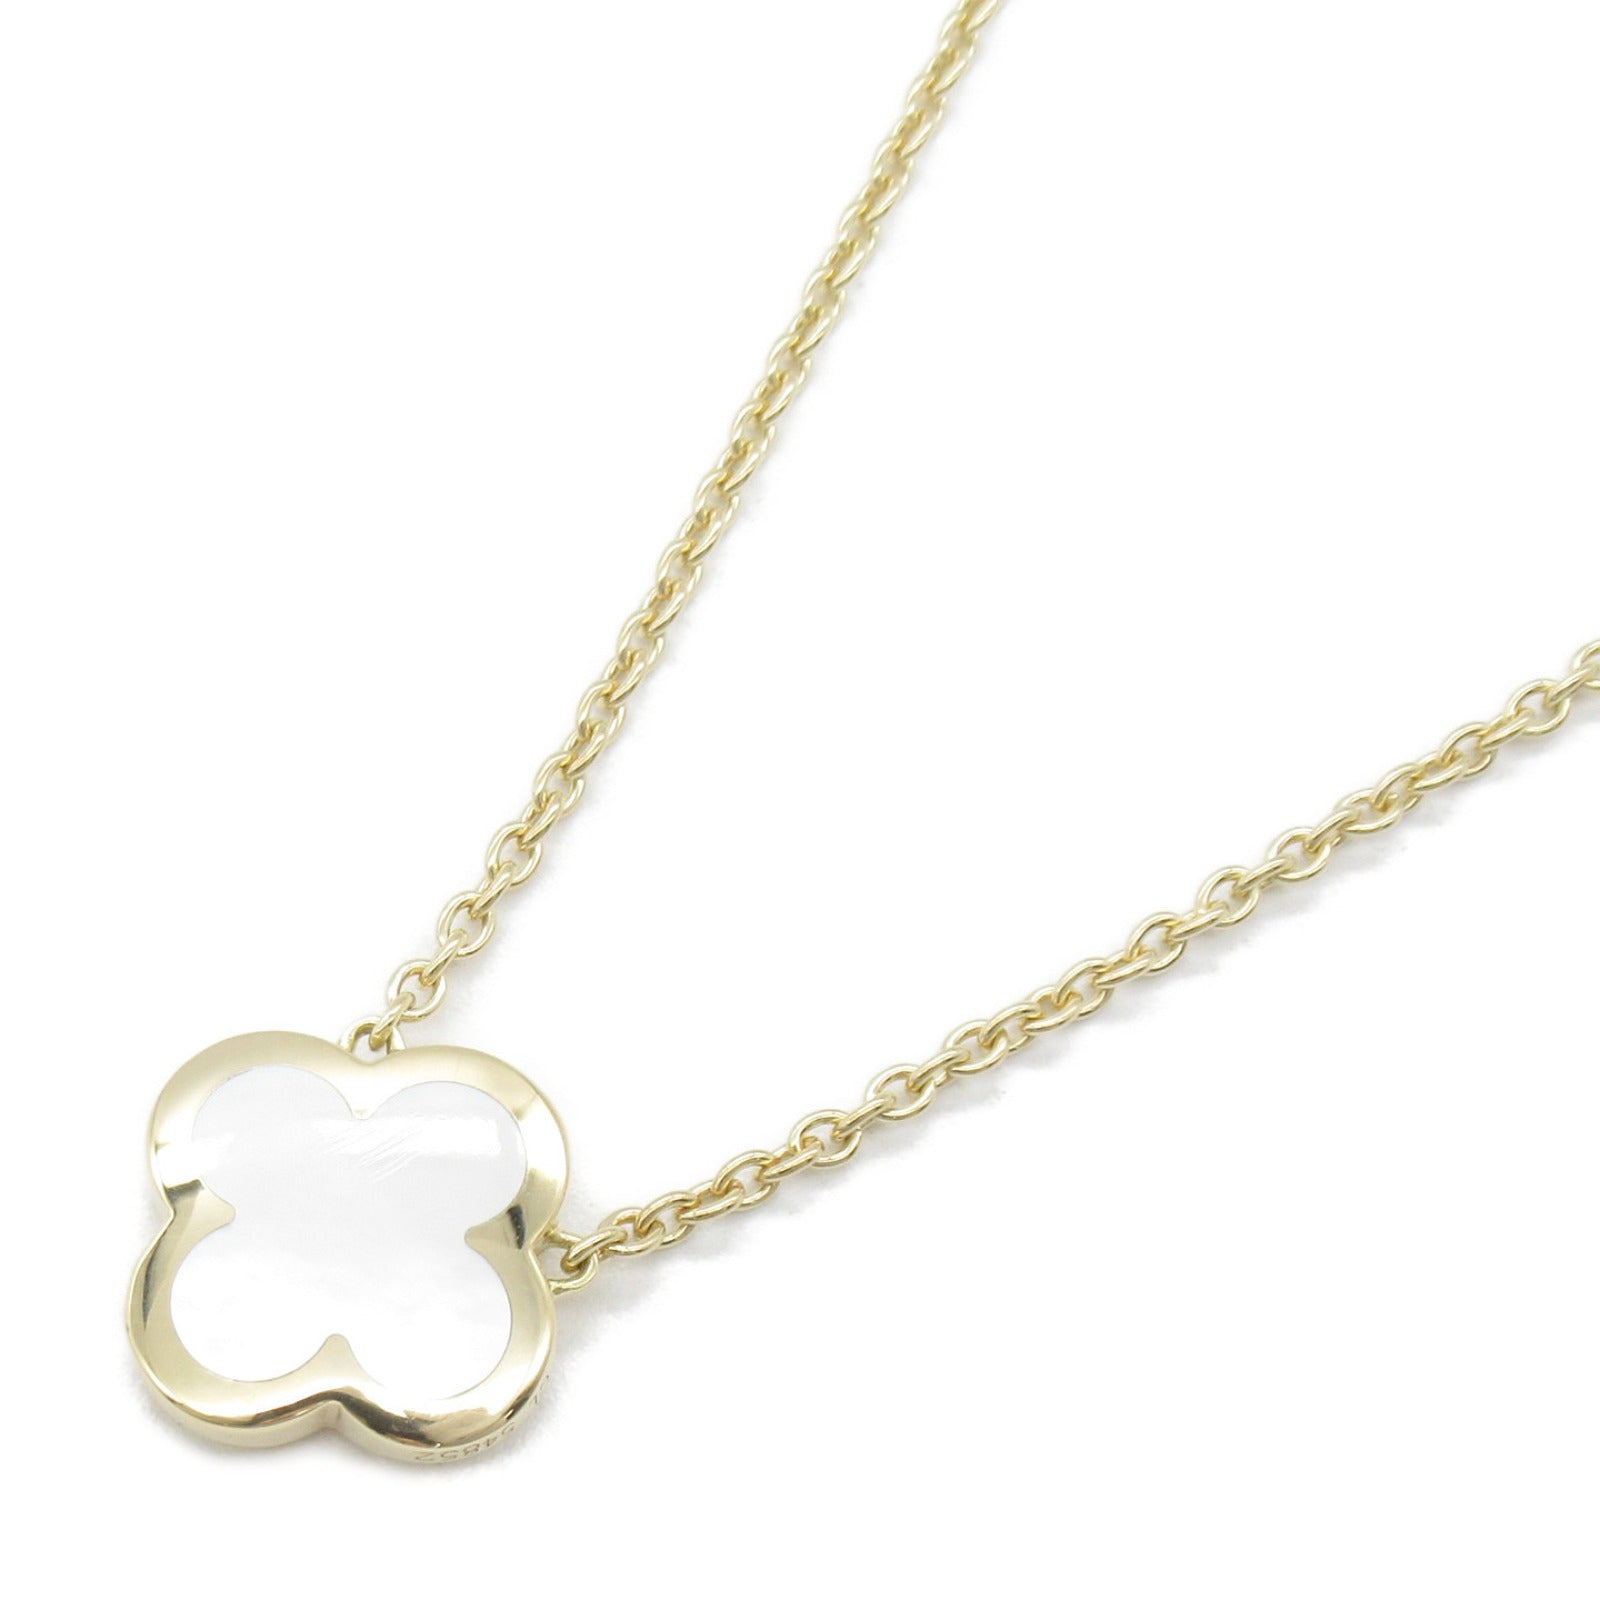 Van Cleef &amp; Arpels Van Cleef &amp; Arpels Alhambra White S Pendant Necklace Jewelry K18 (yellow g) White Shell  White Shell